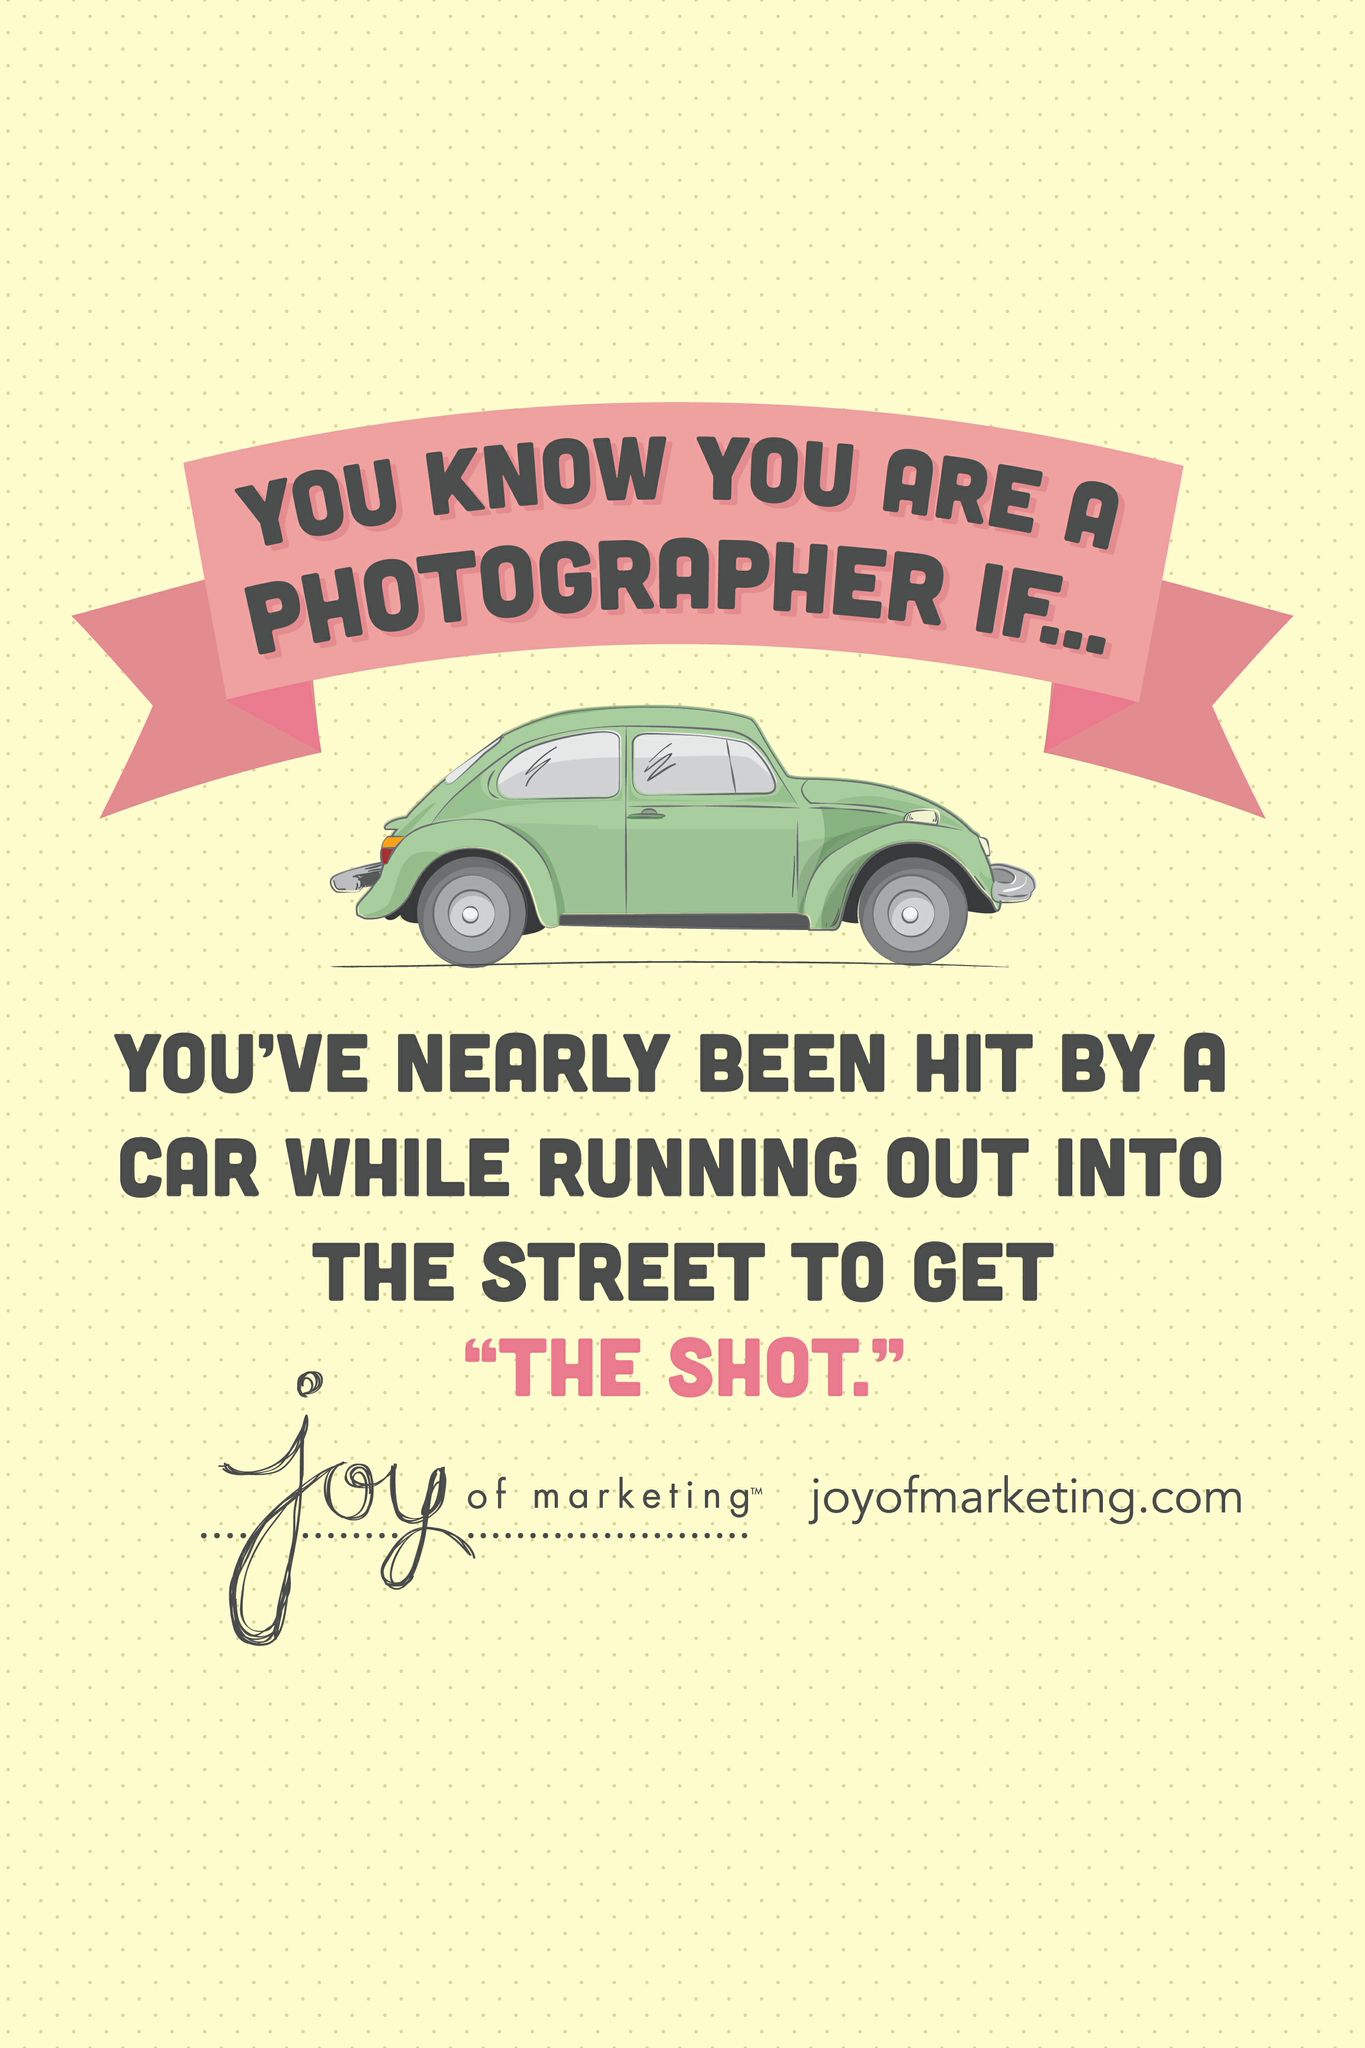 You know you're a photographer if you've nearly been hit by a car while running out into the street to get “the shot.”